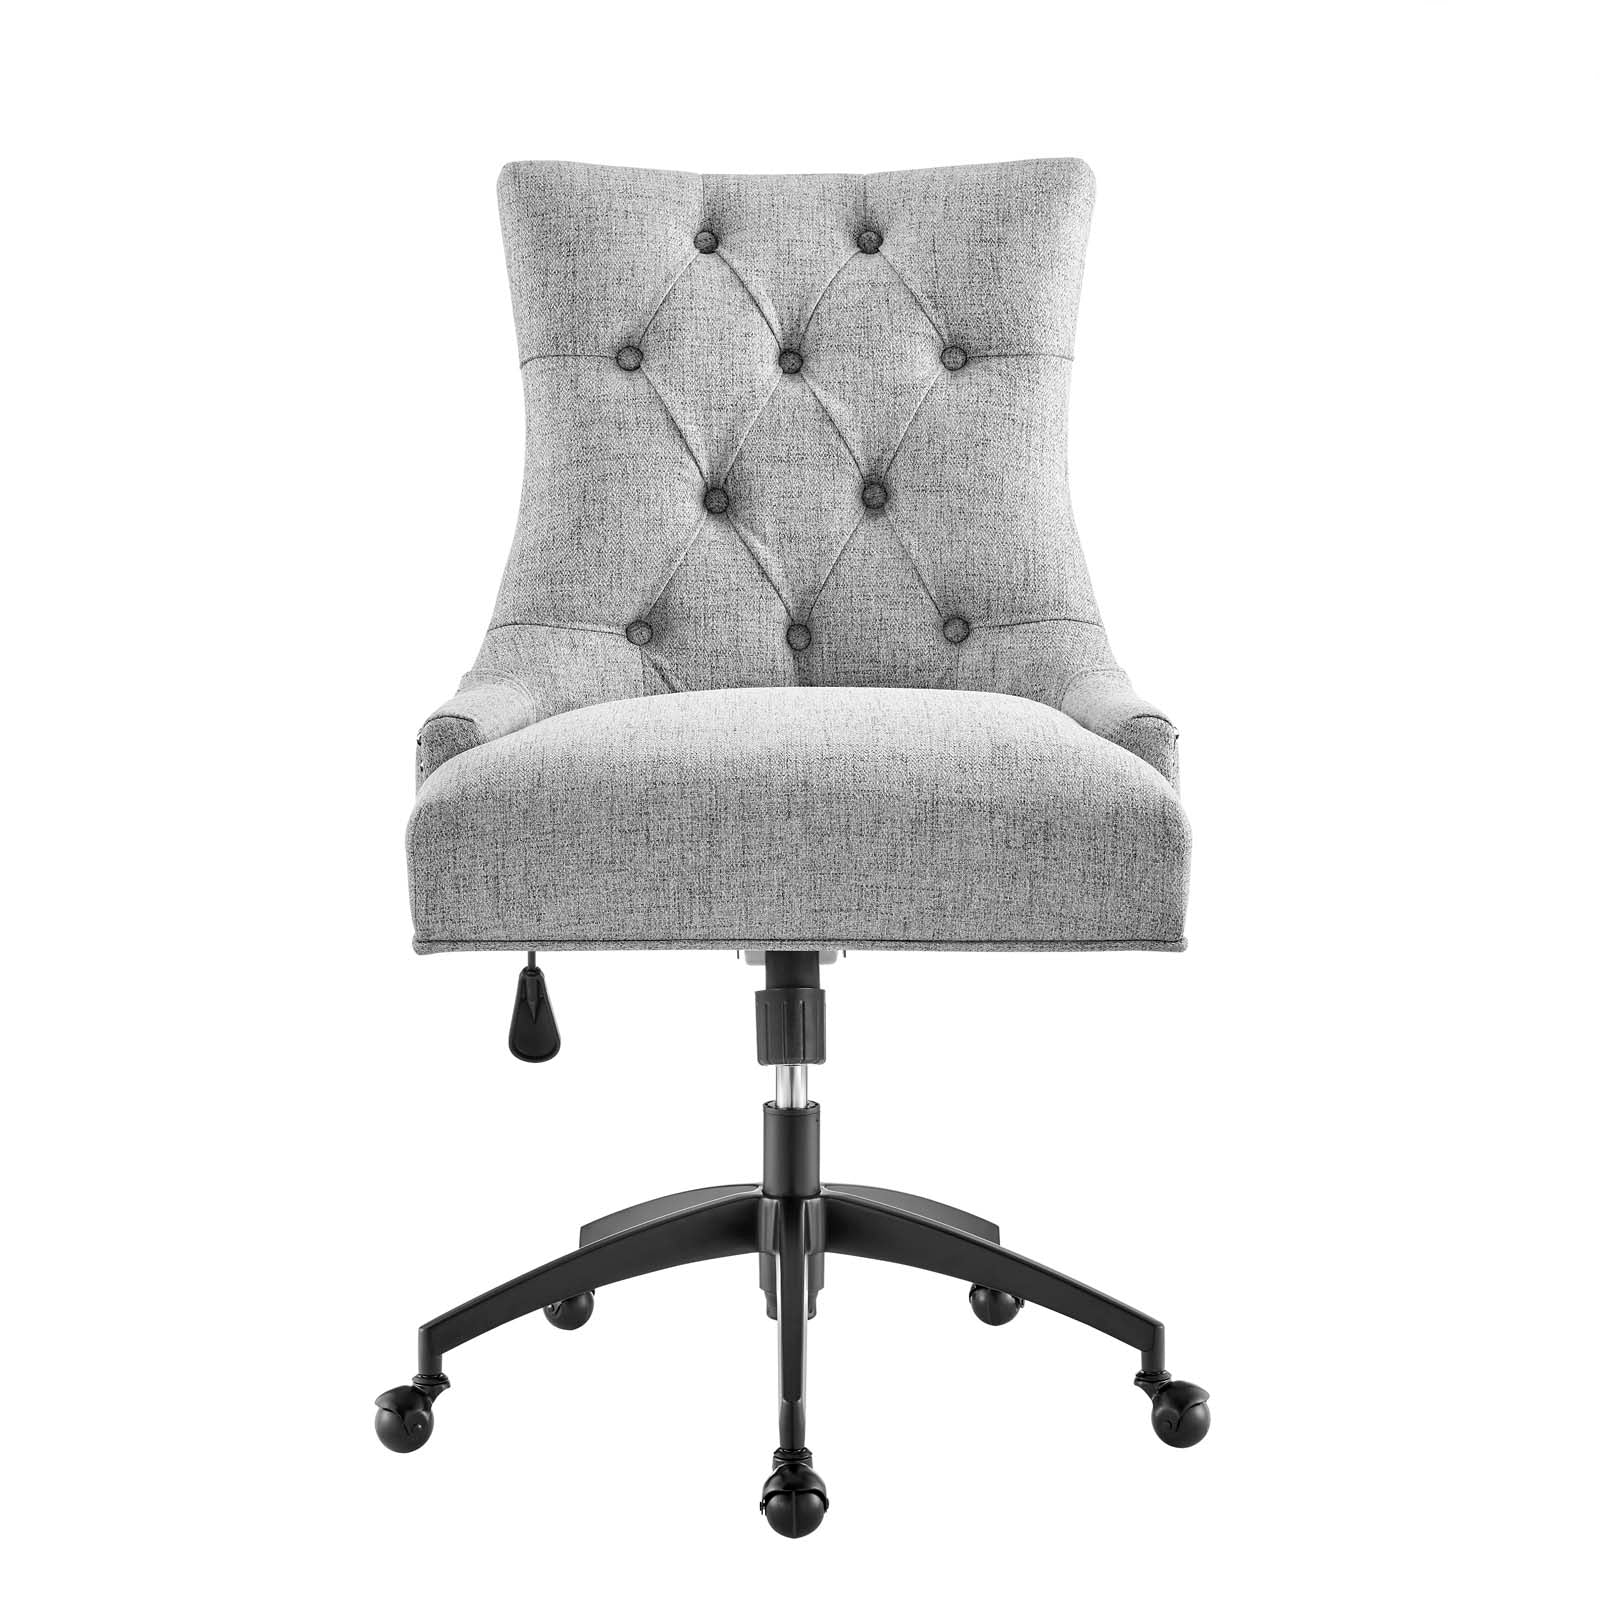 Modway Task Chairs - Regent Tufted Fabric Office Chair Black Light Gray